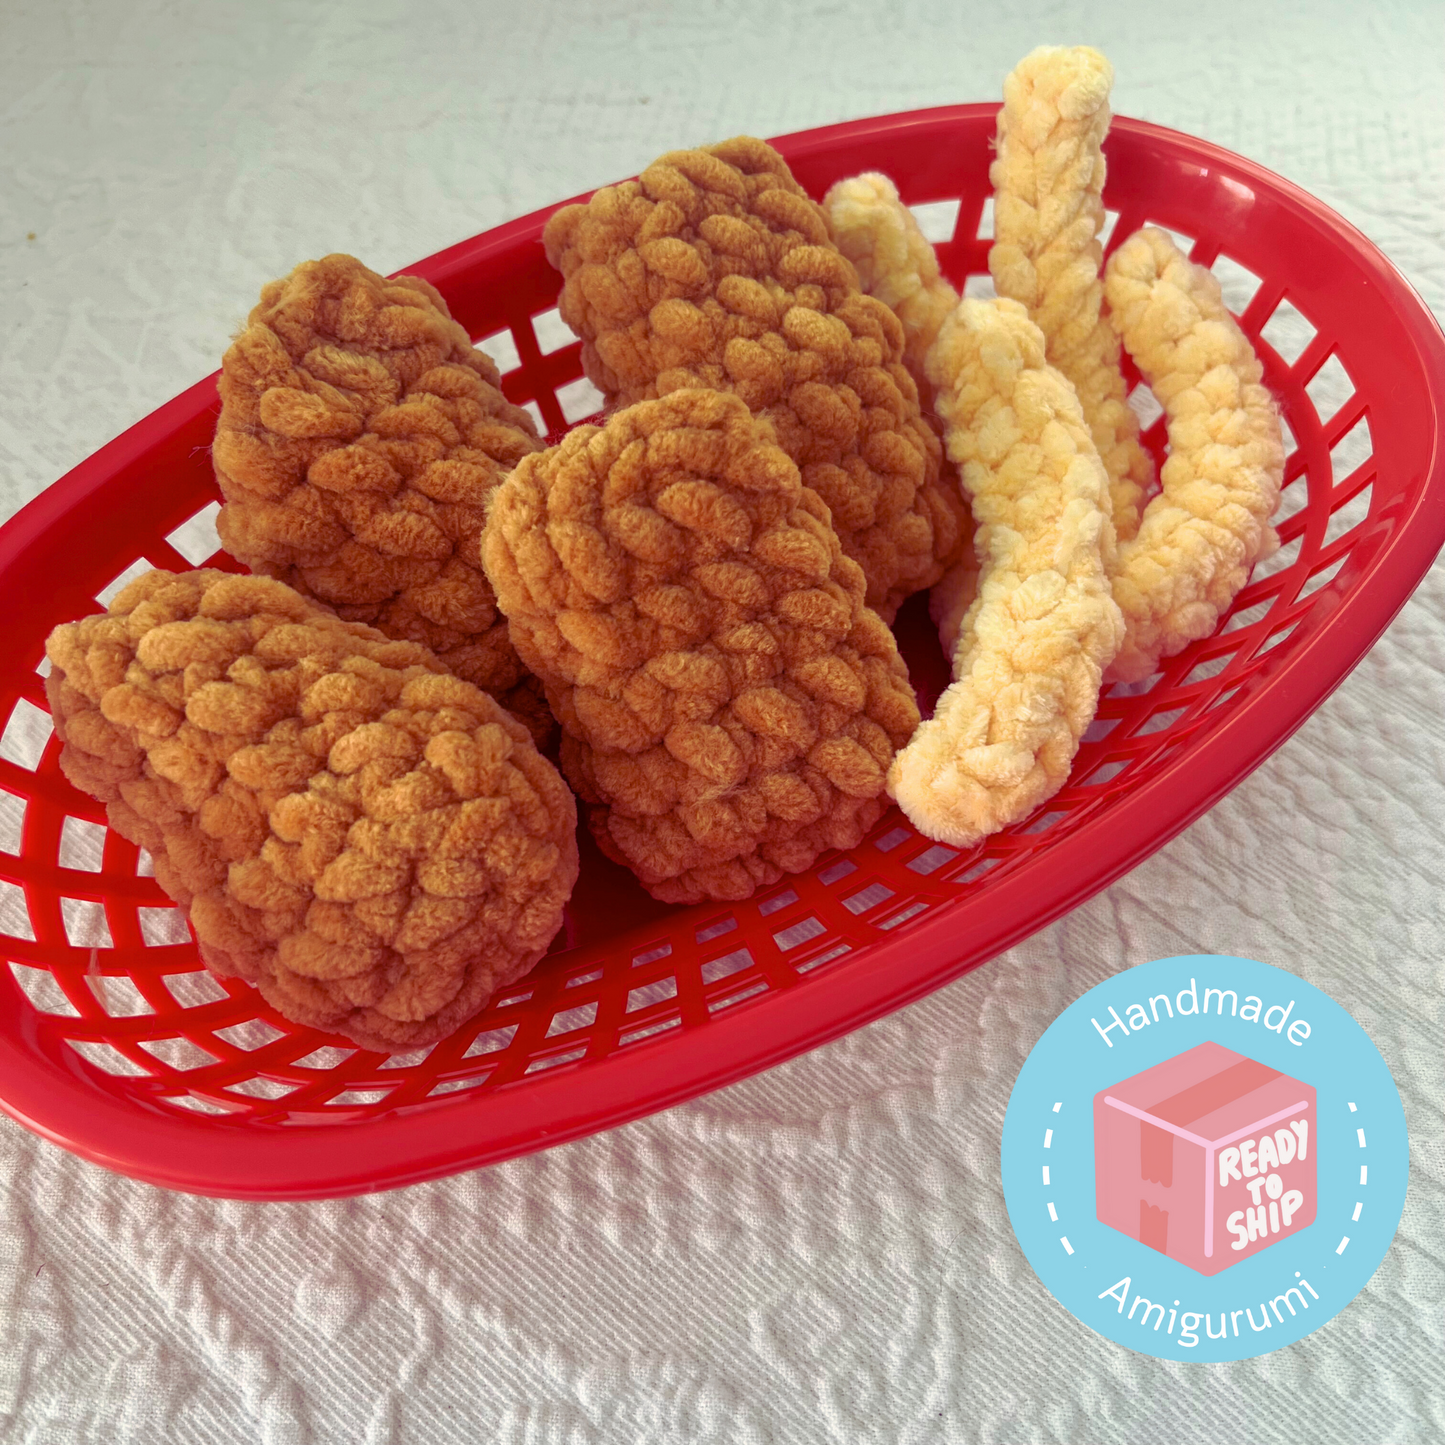 Chicken Nugget Play Food Set.  Crochet Play Food set- 9 pieces Handmade Nuggies + Fries Set READY to SHIP.  4 nuggets, 4 fries & basket